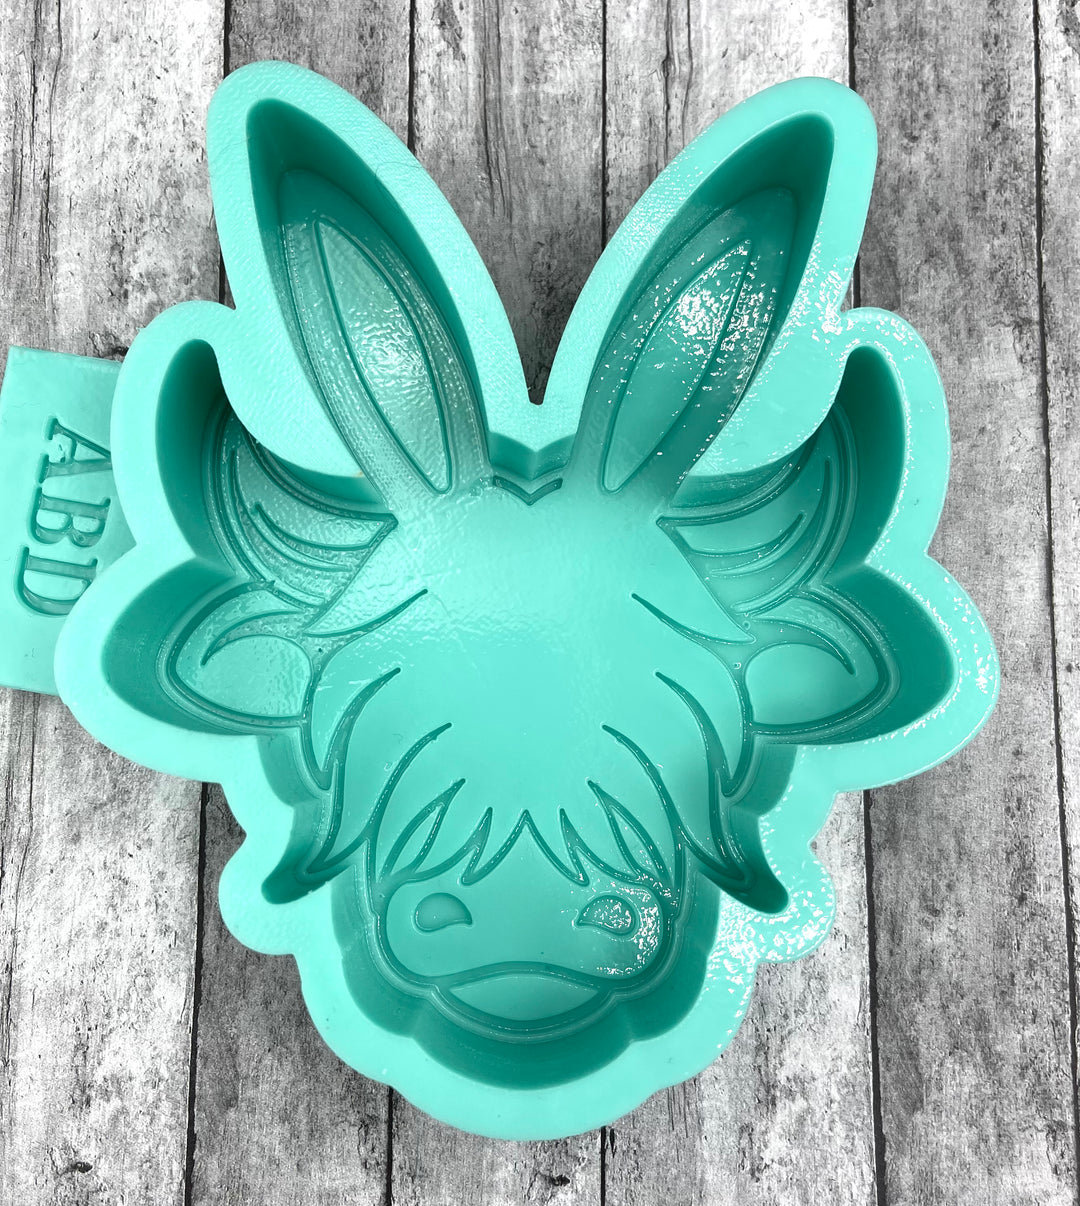 Highland Cow with Rabbit Ears Freshie Silicone Mold